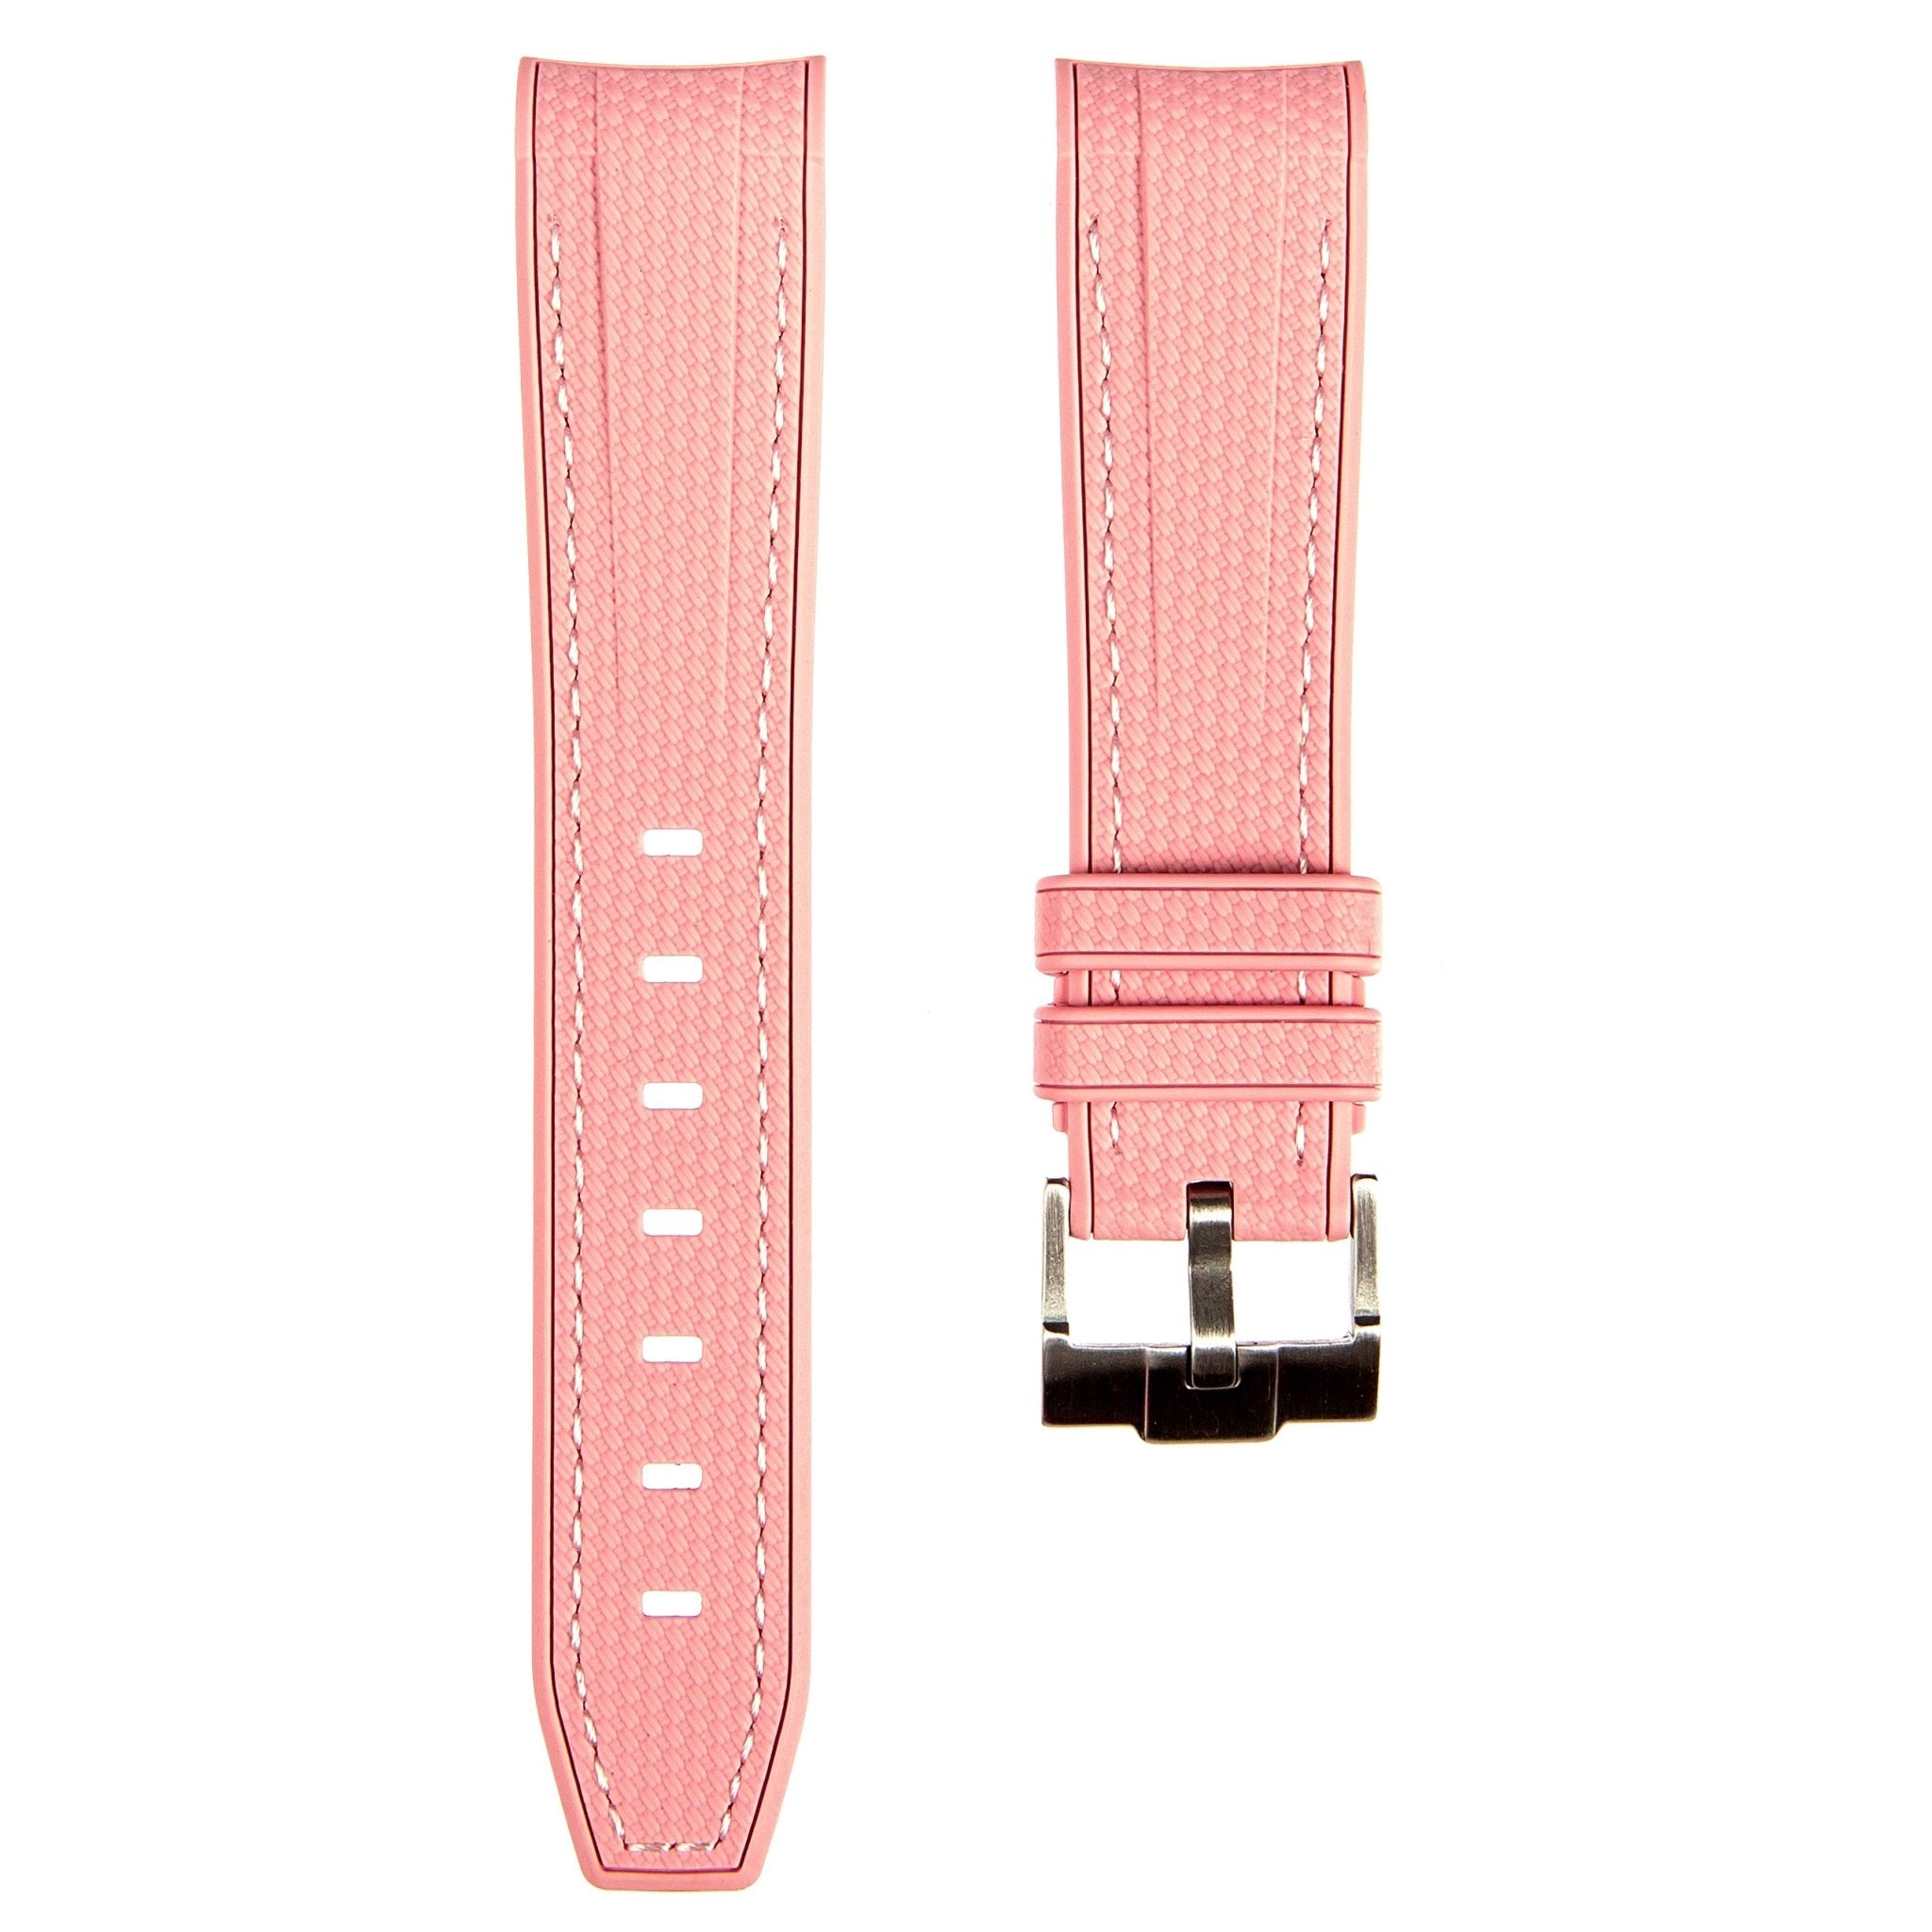 Textured Curved End Premium Silicone Strap - Compatible with Omega Moonwatch - Light Pink (2405) -StrapSeeker